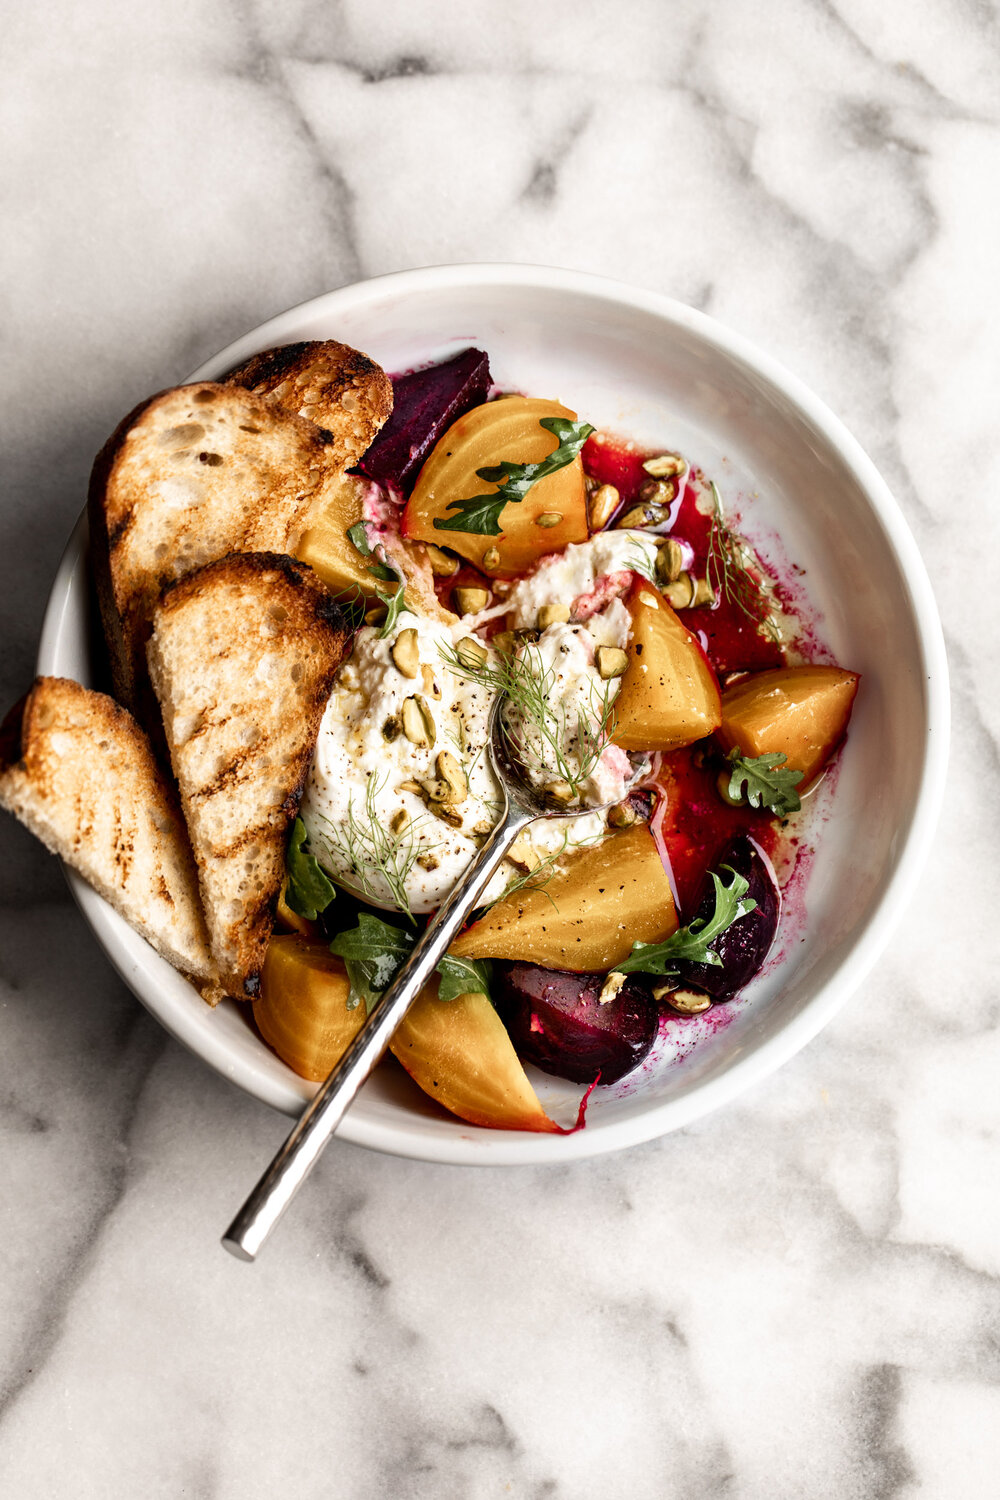 Roasted Beet Salad with Burrata topped with pistachio and fennel fronds with grilled bread